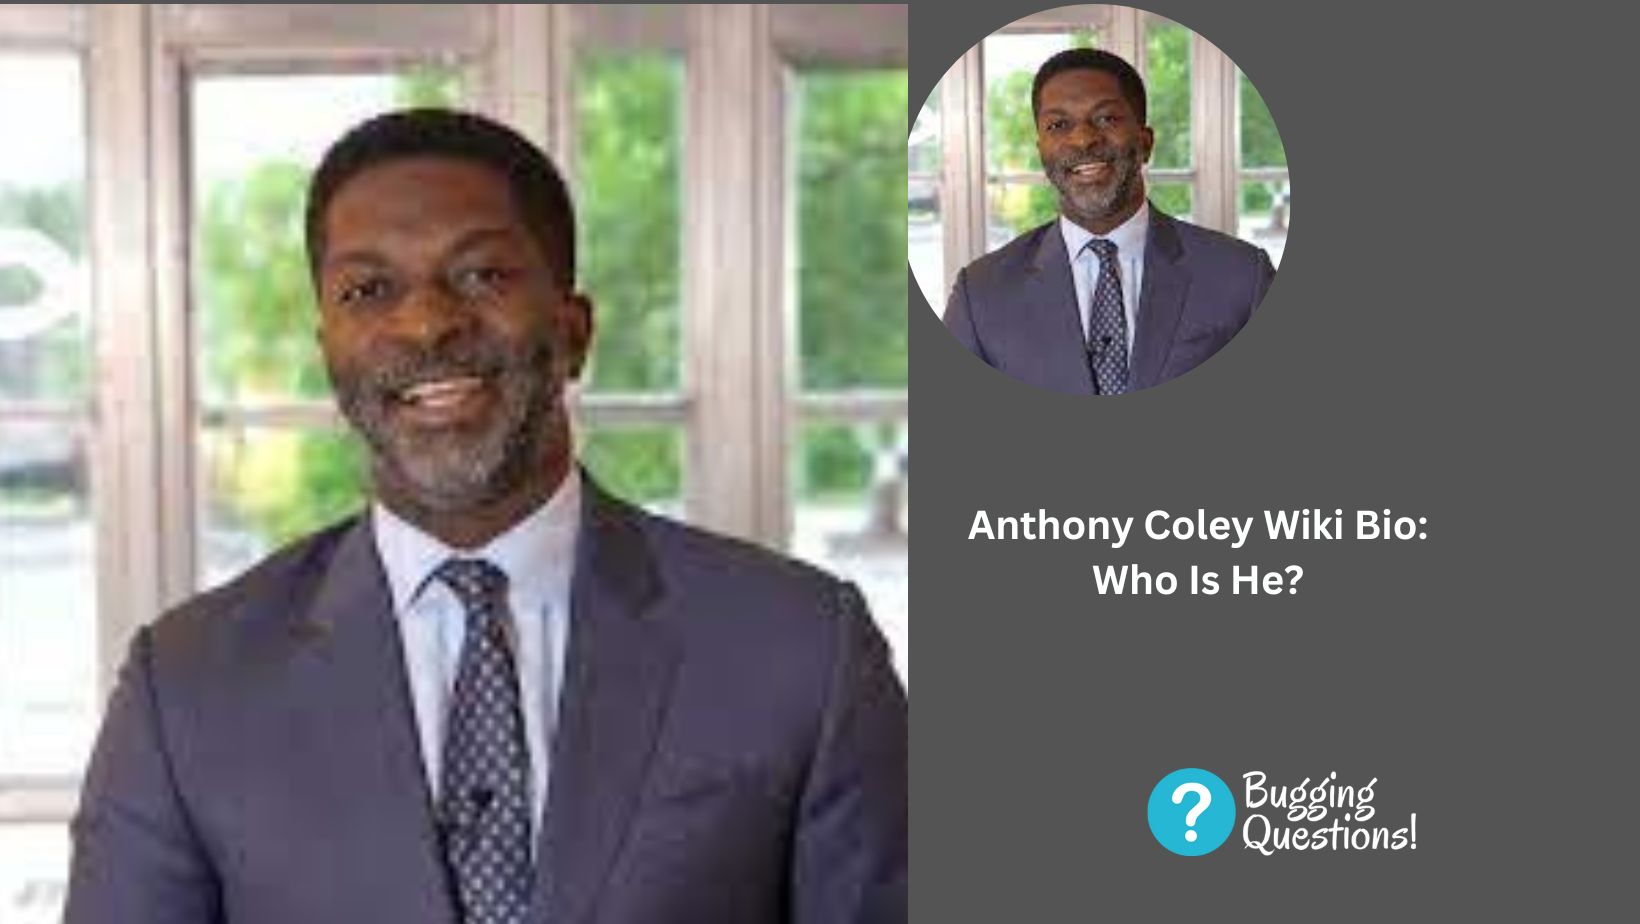 Anthony Coley Wiki Bio: Who Is He?